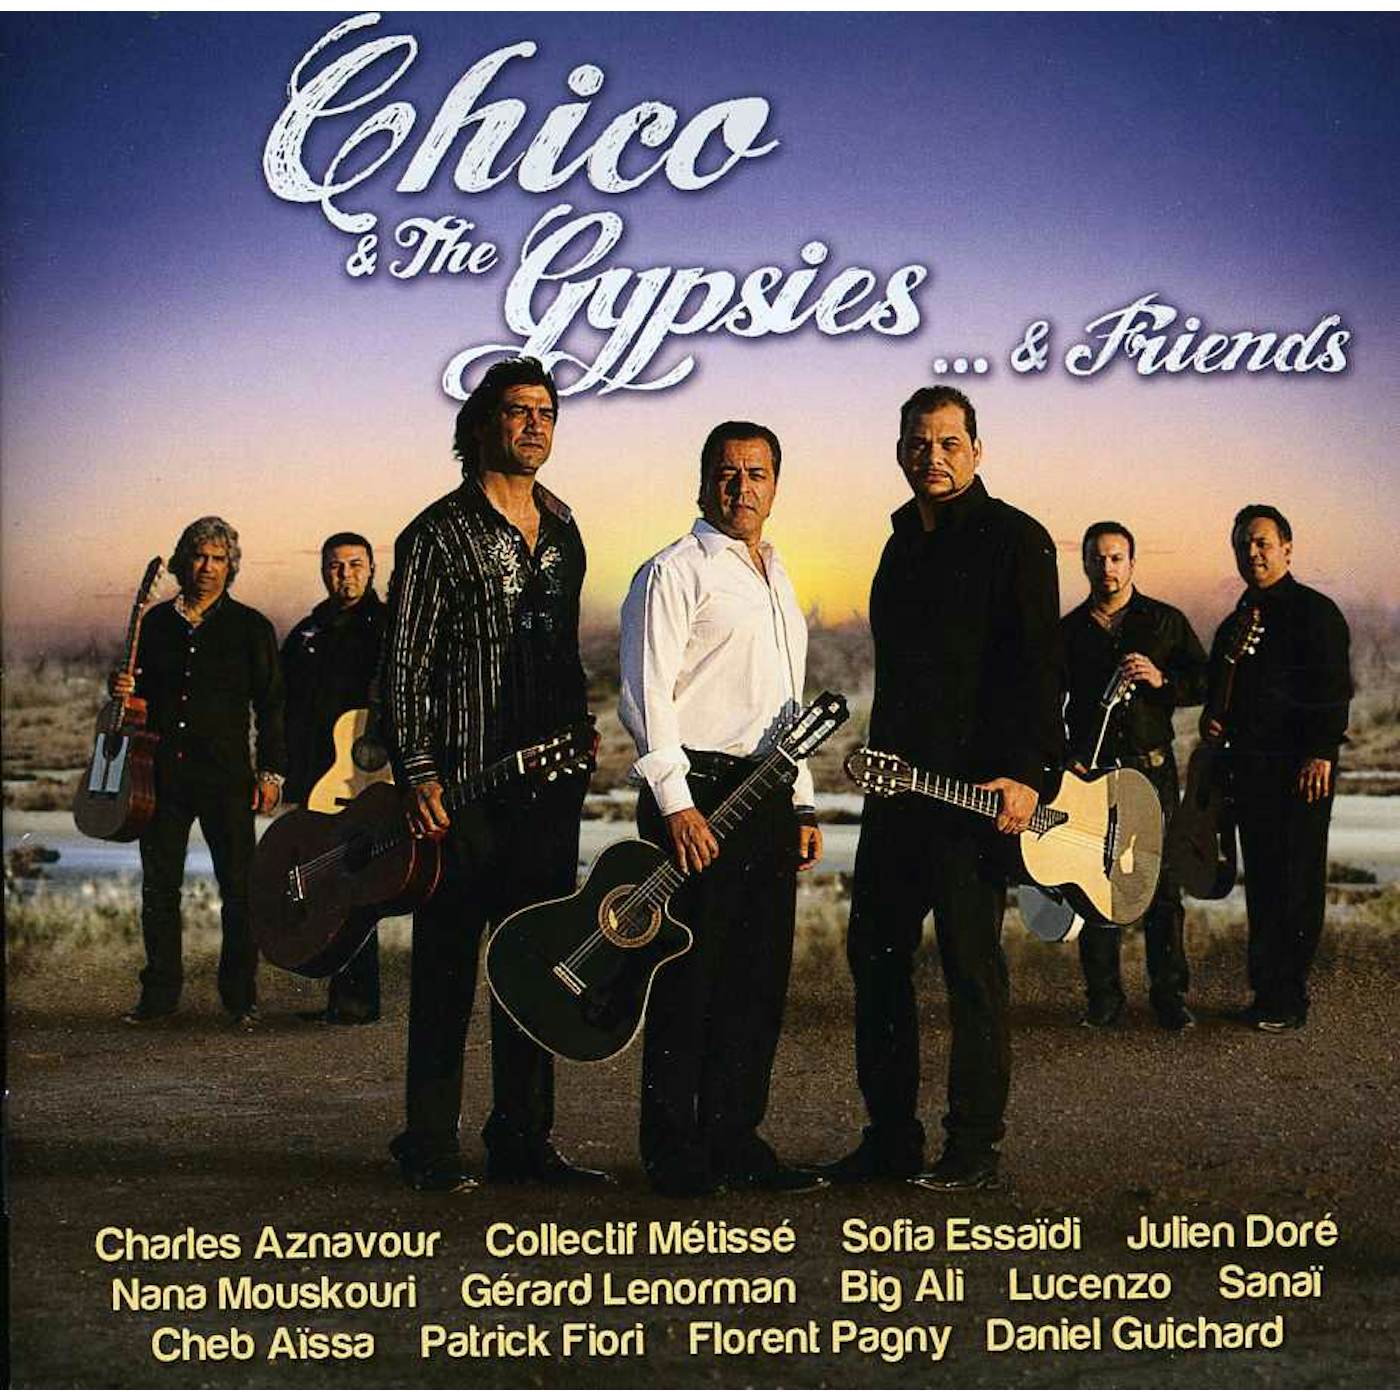 CHICO & THE GYPSIES & FRIENDS CD